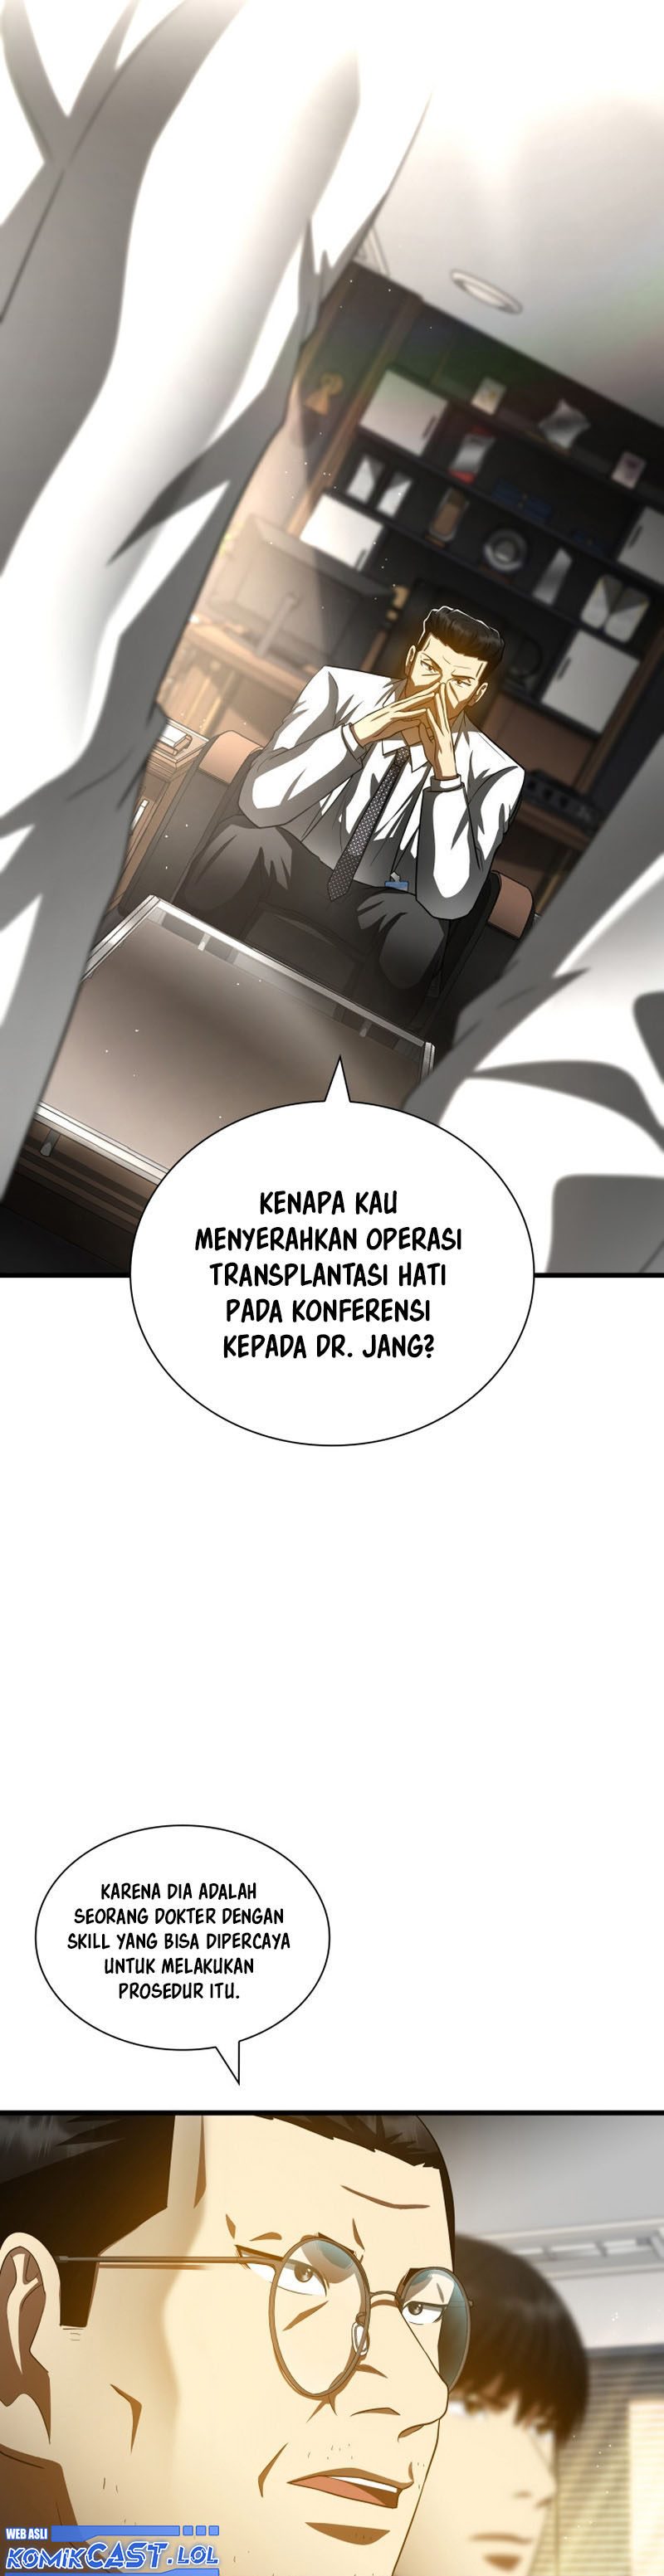 Perfect Surgeon Chapter 96